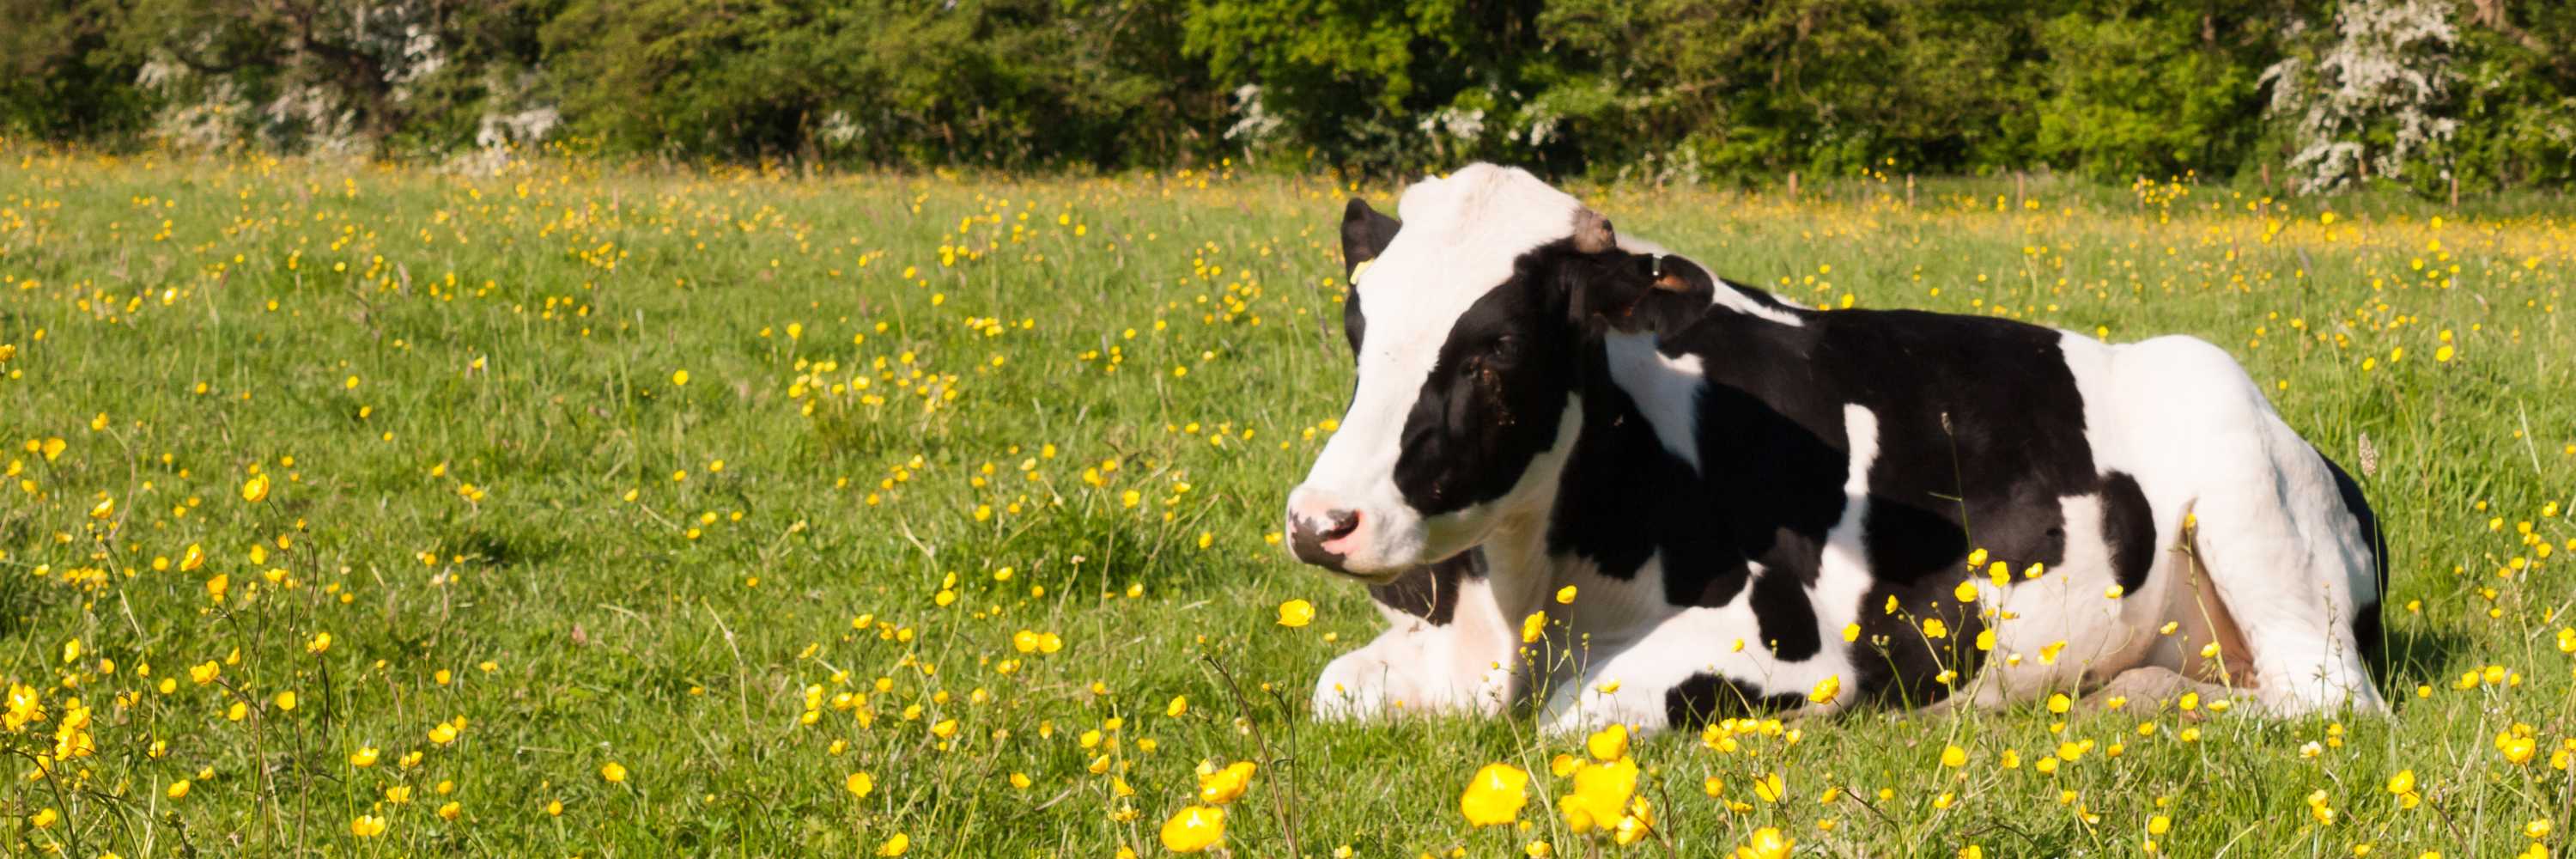 Cow lies peacefully in a field of flowers